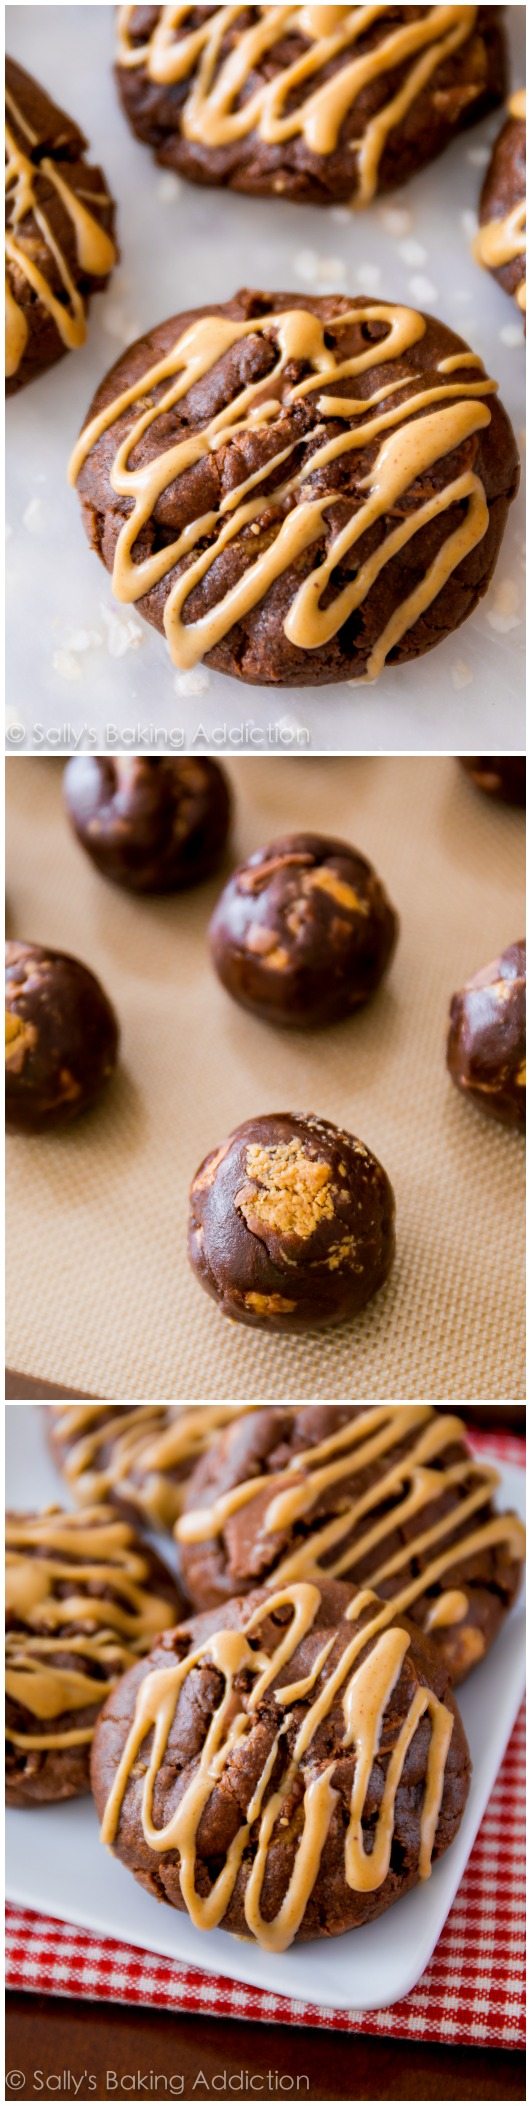 3 images of peanut butter chocolate cookies